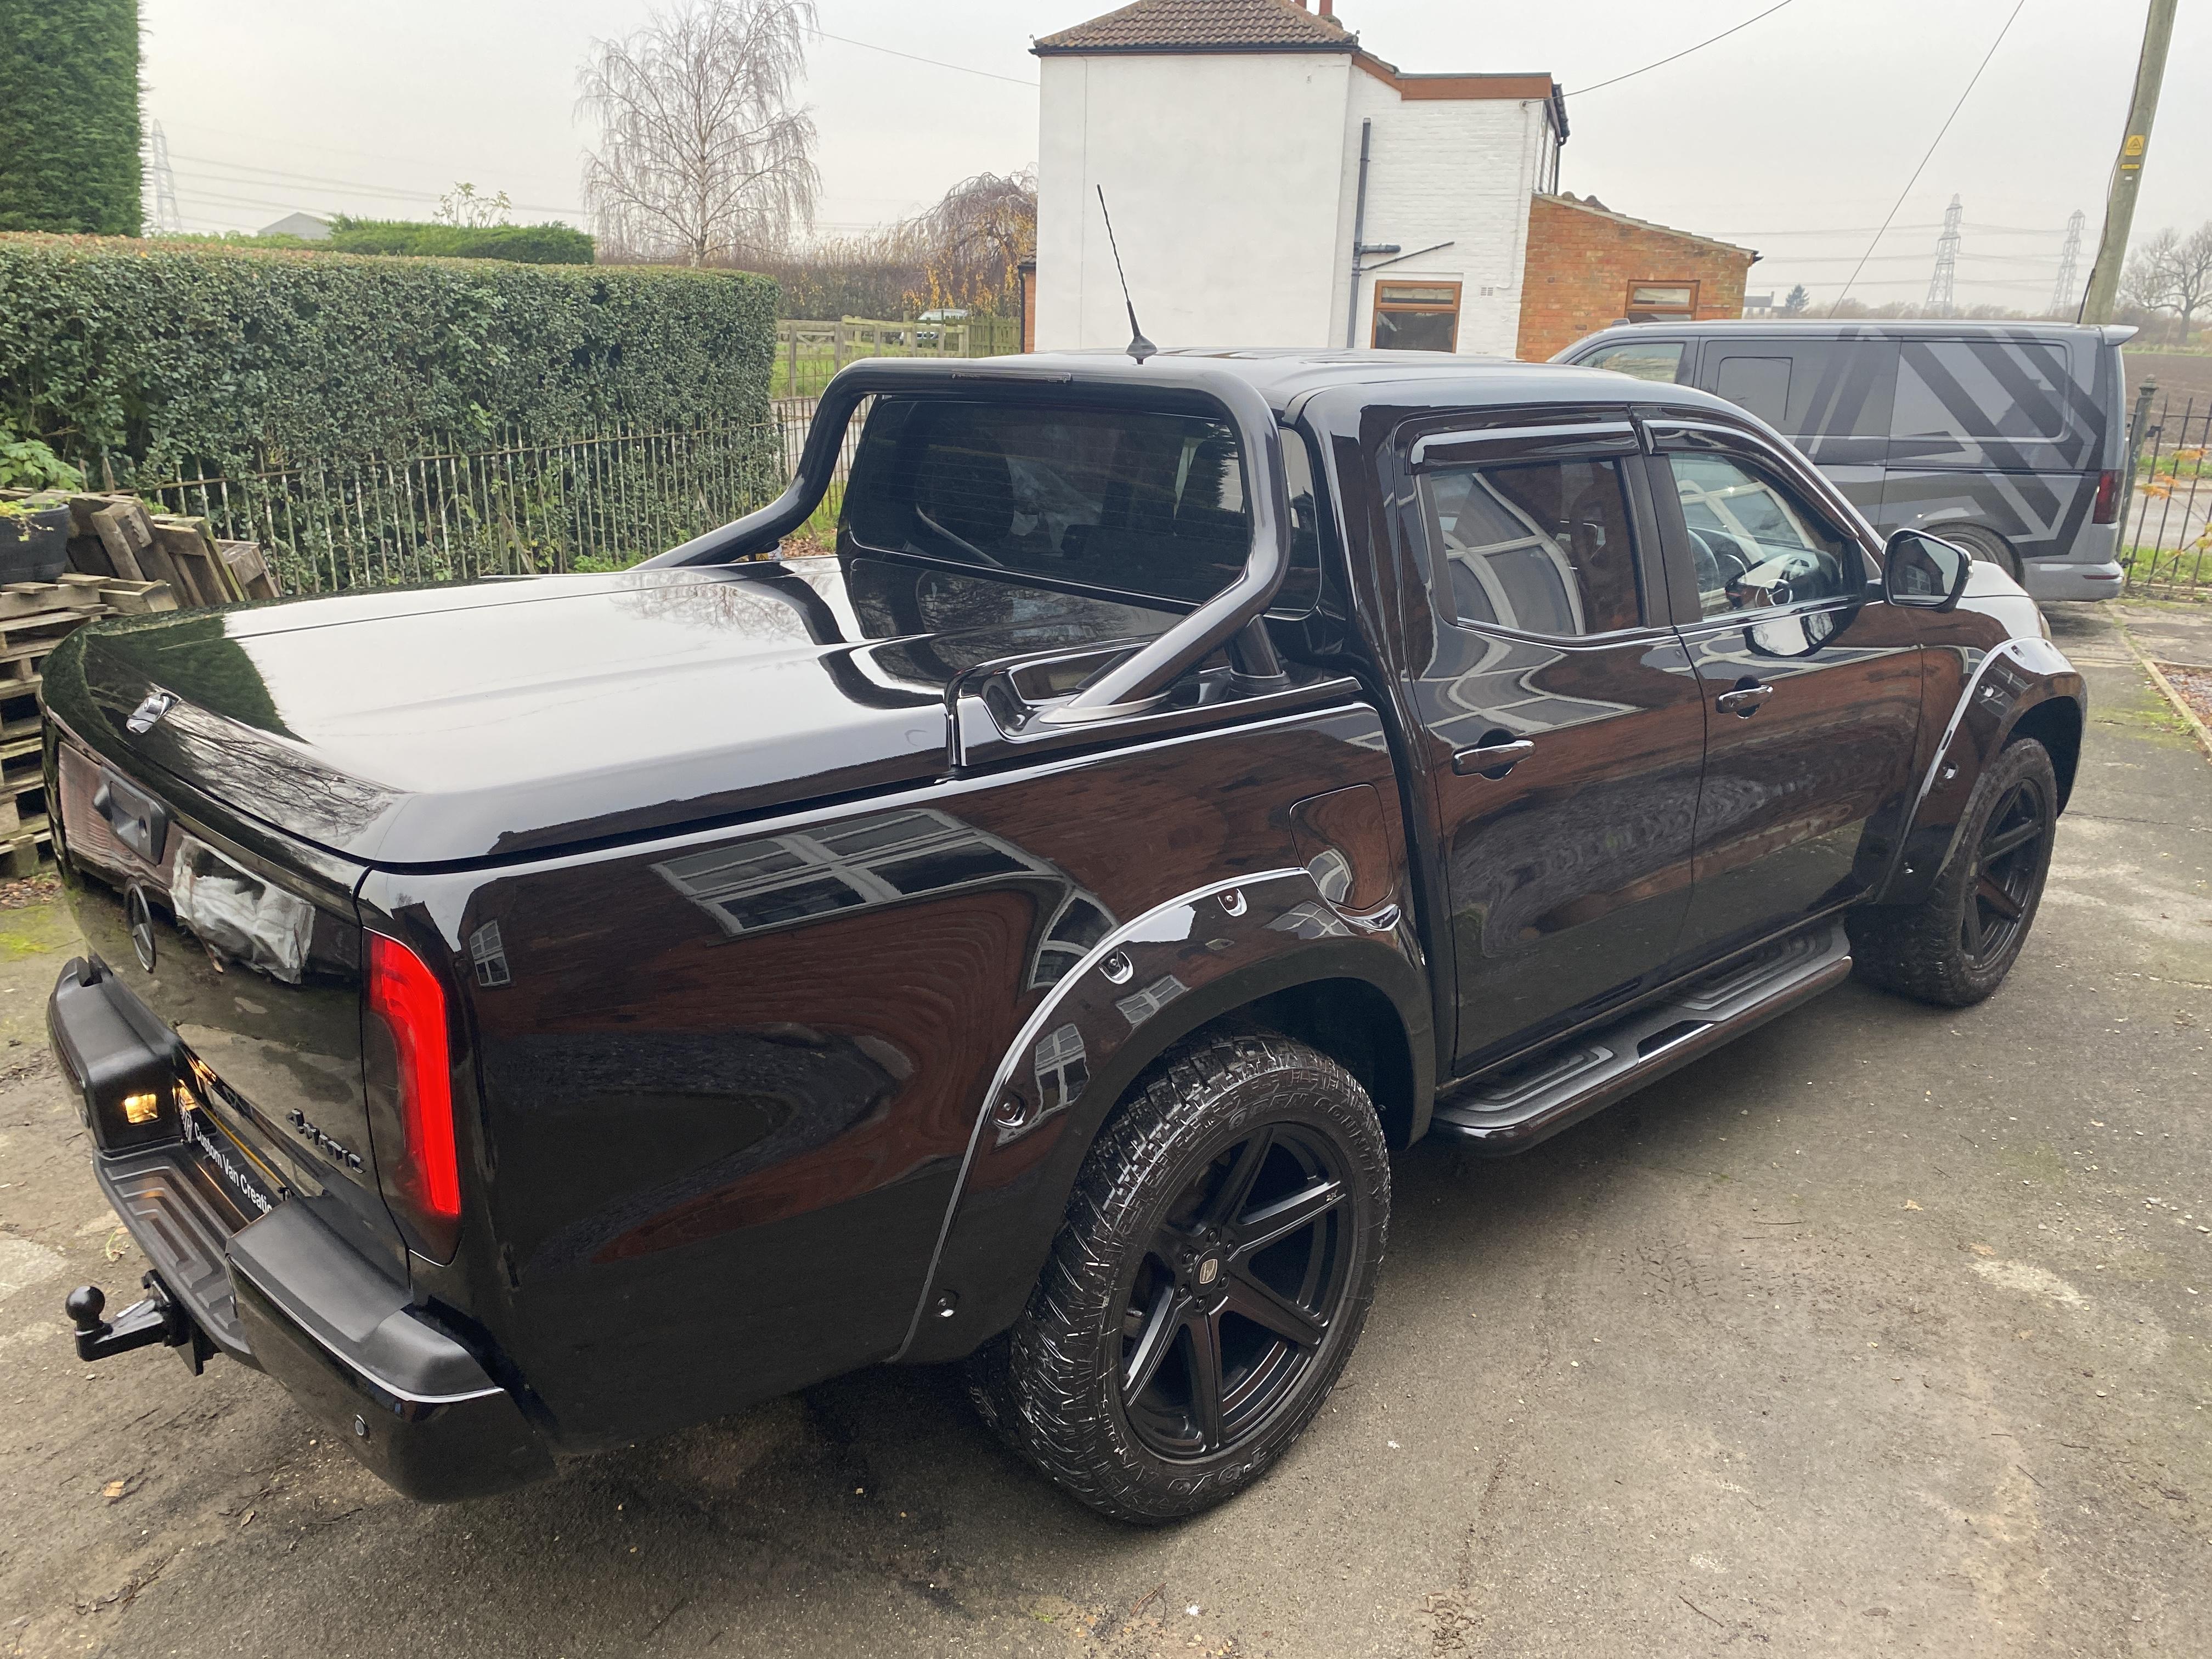 SOLD UNHINGED Limited Mercedes X-Class Ultra wide Pickup